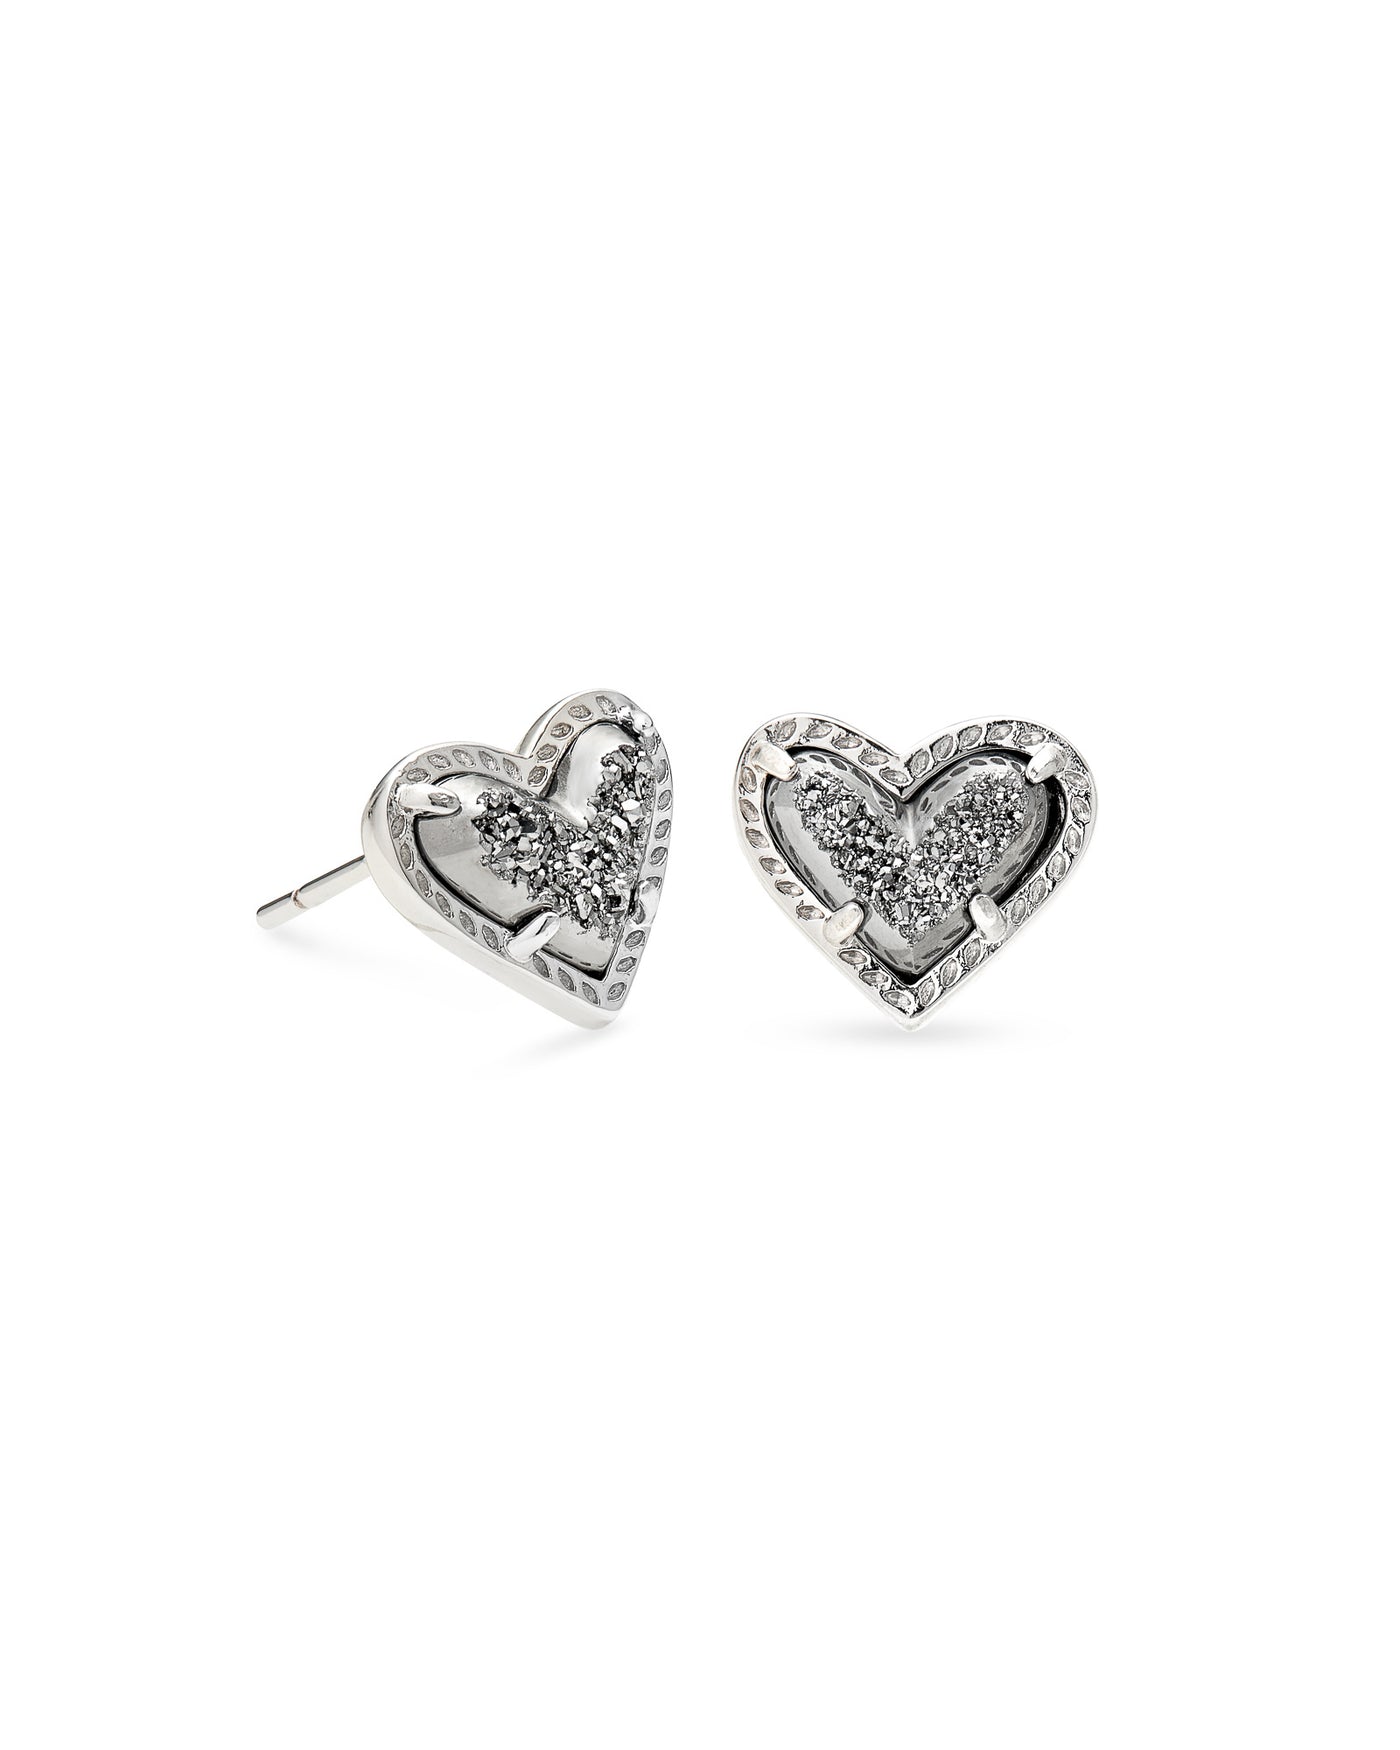 Ari Heart Stud Earrings Silver Platinum Drusy on white background, front view.